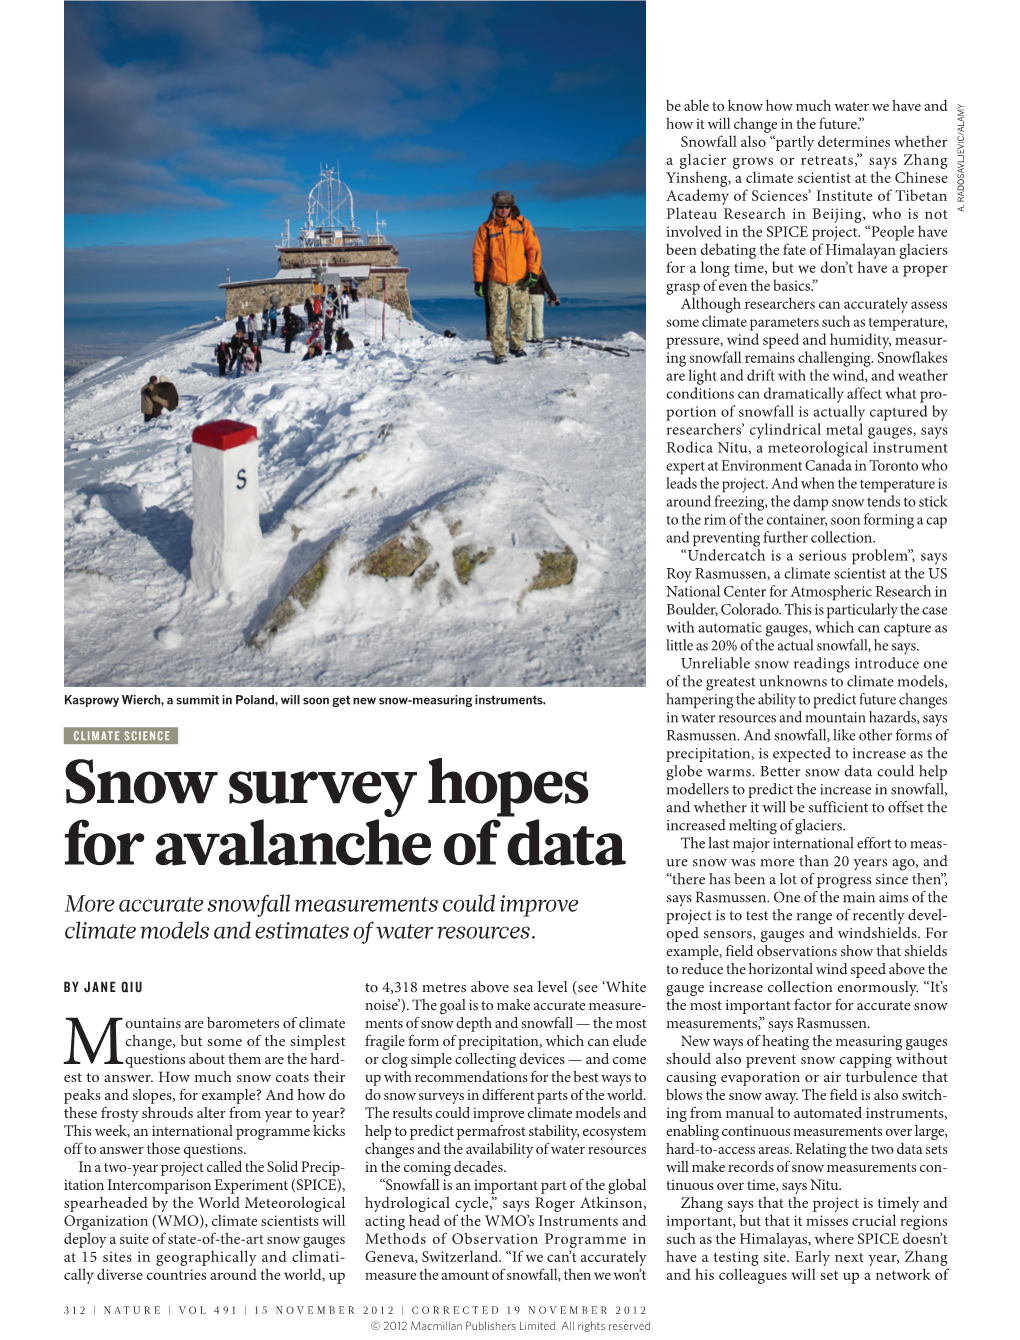 Snow Survey Hopes for Avalanche of Data